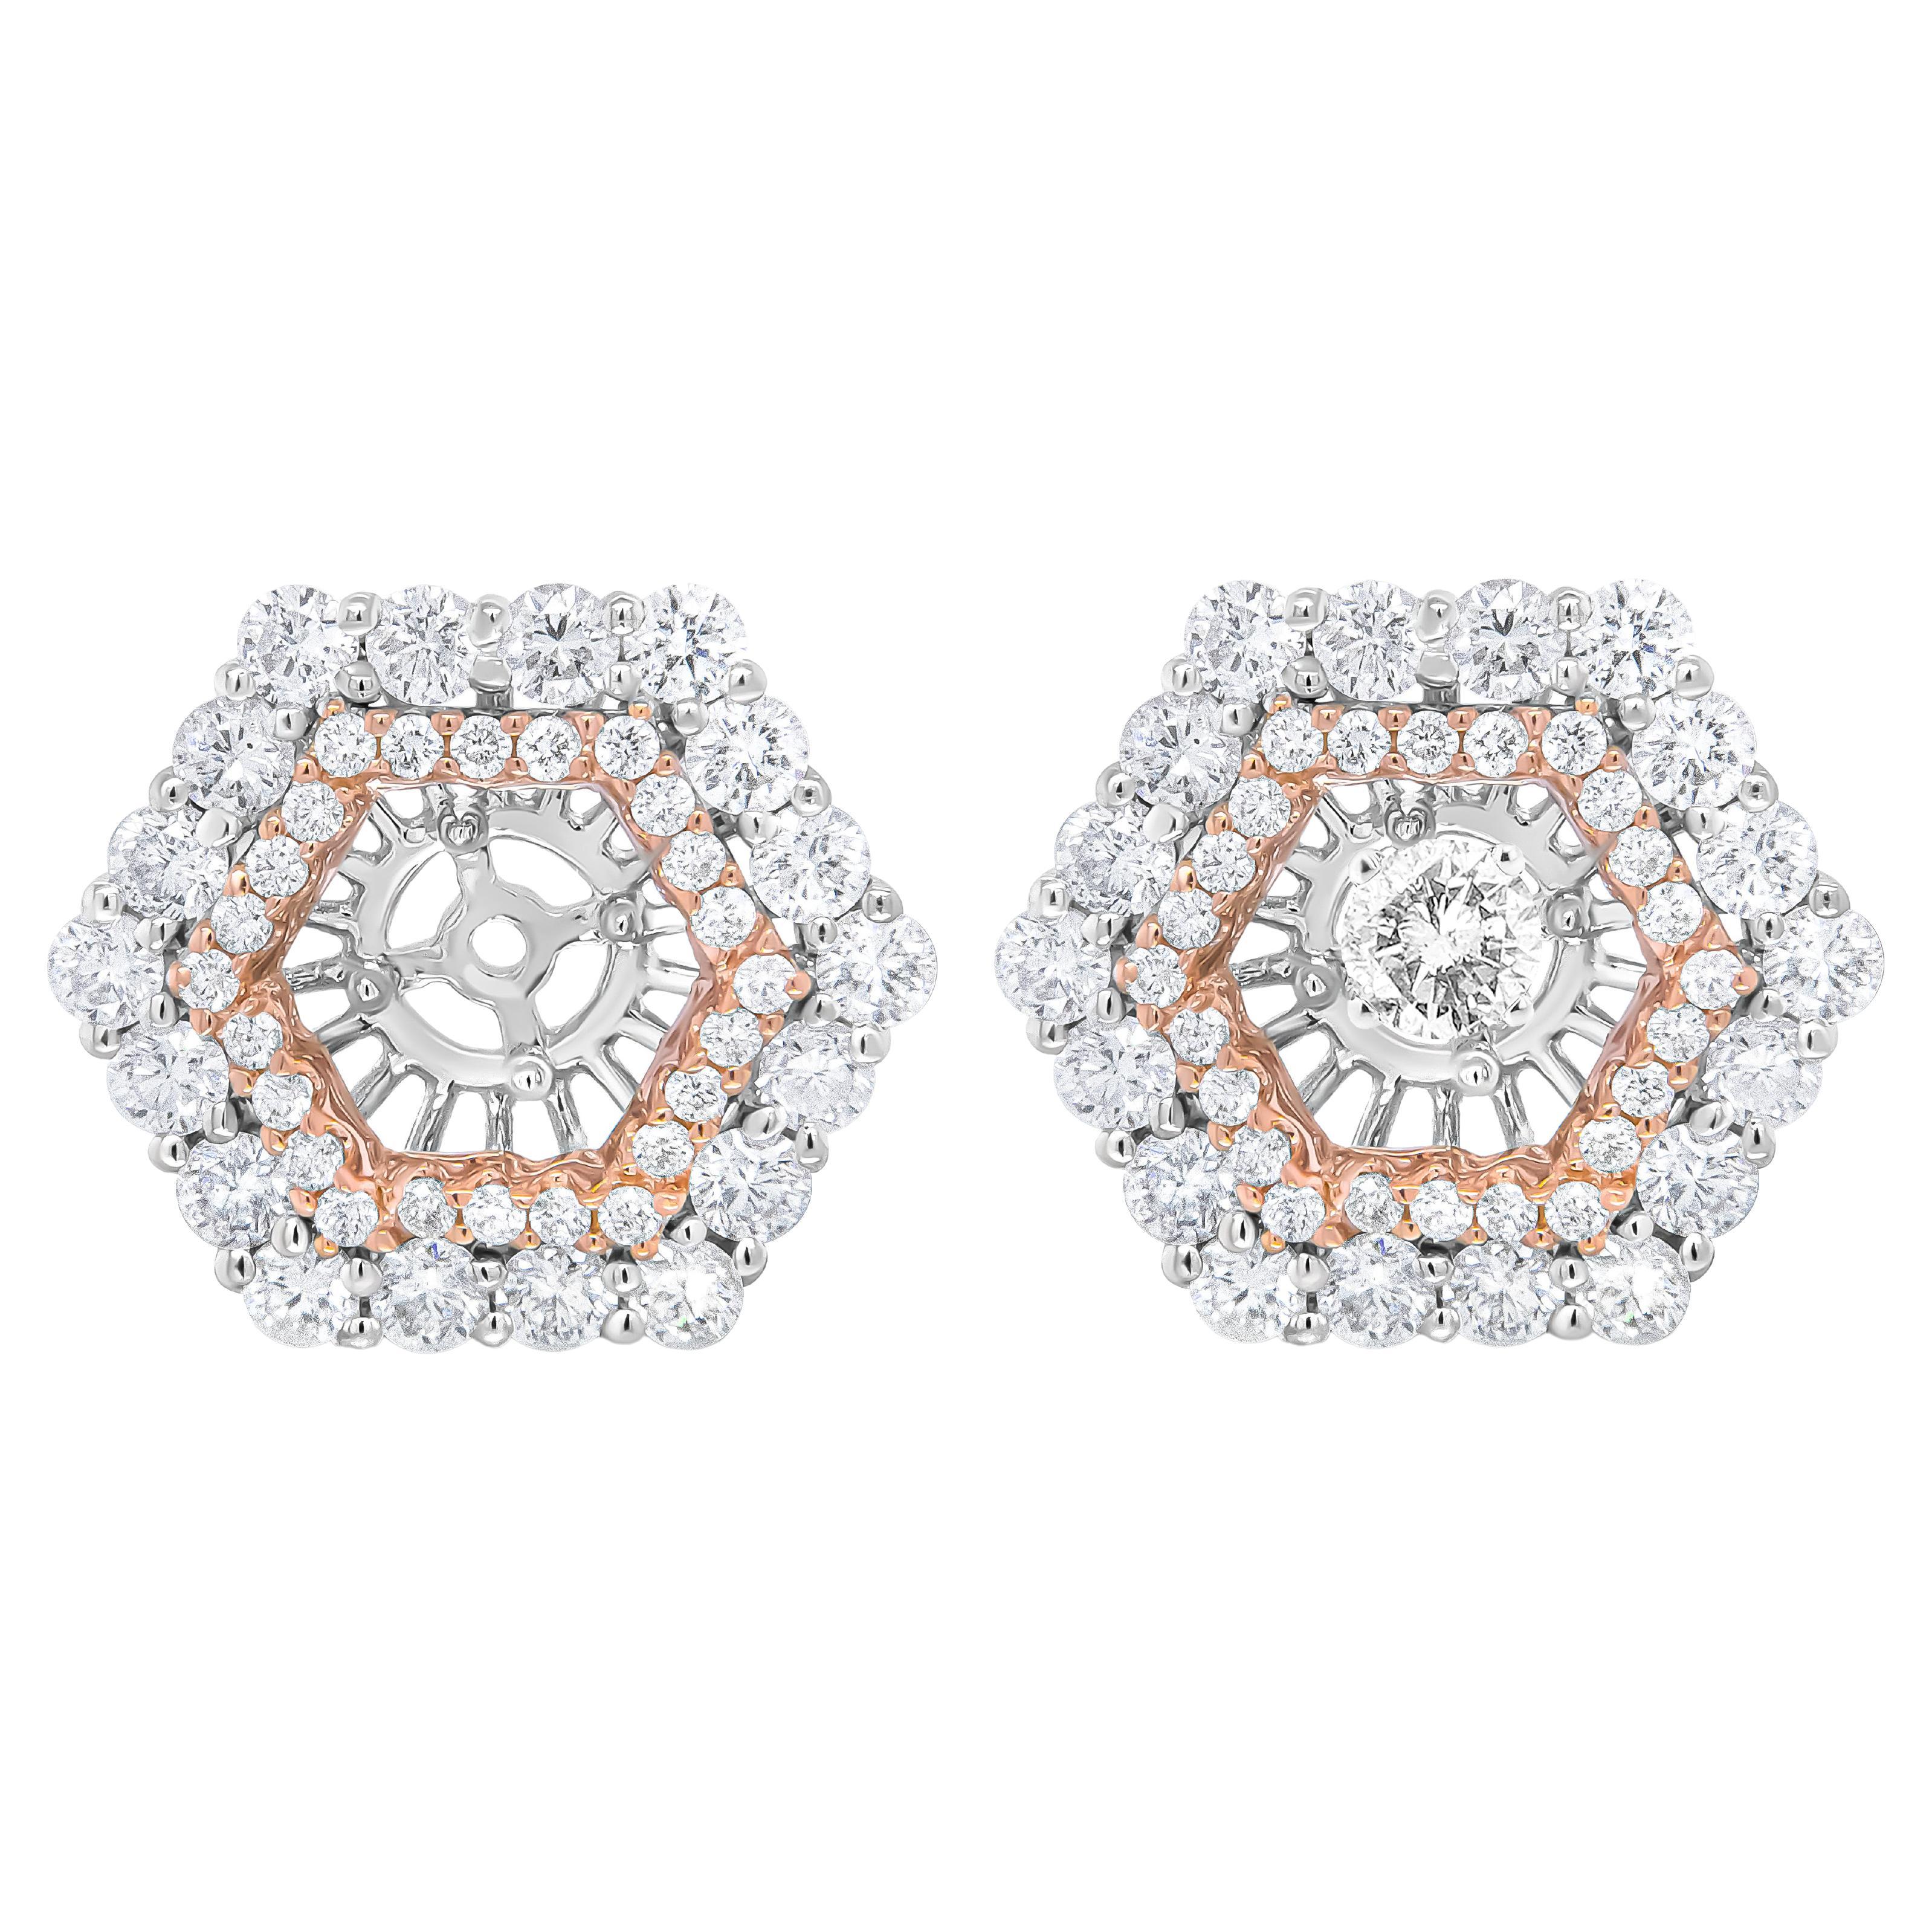 14K Rose and White Gold 1 7/8 Carat Diamond Double Halo Earring Jacket for Studs For Sale